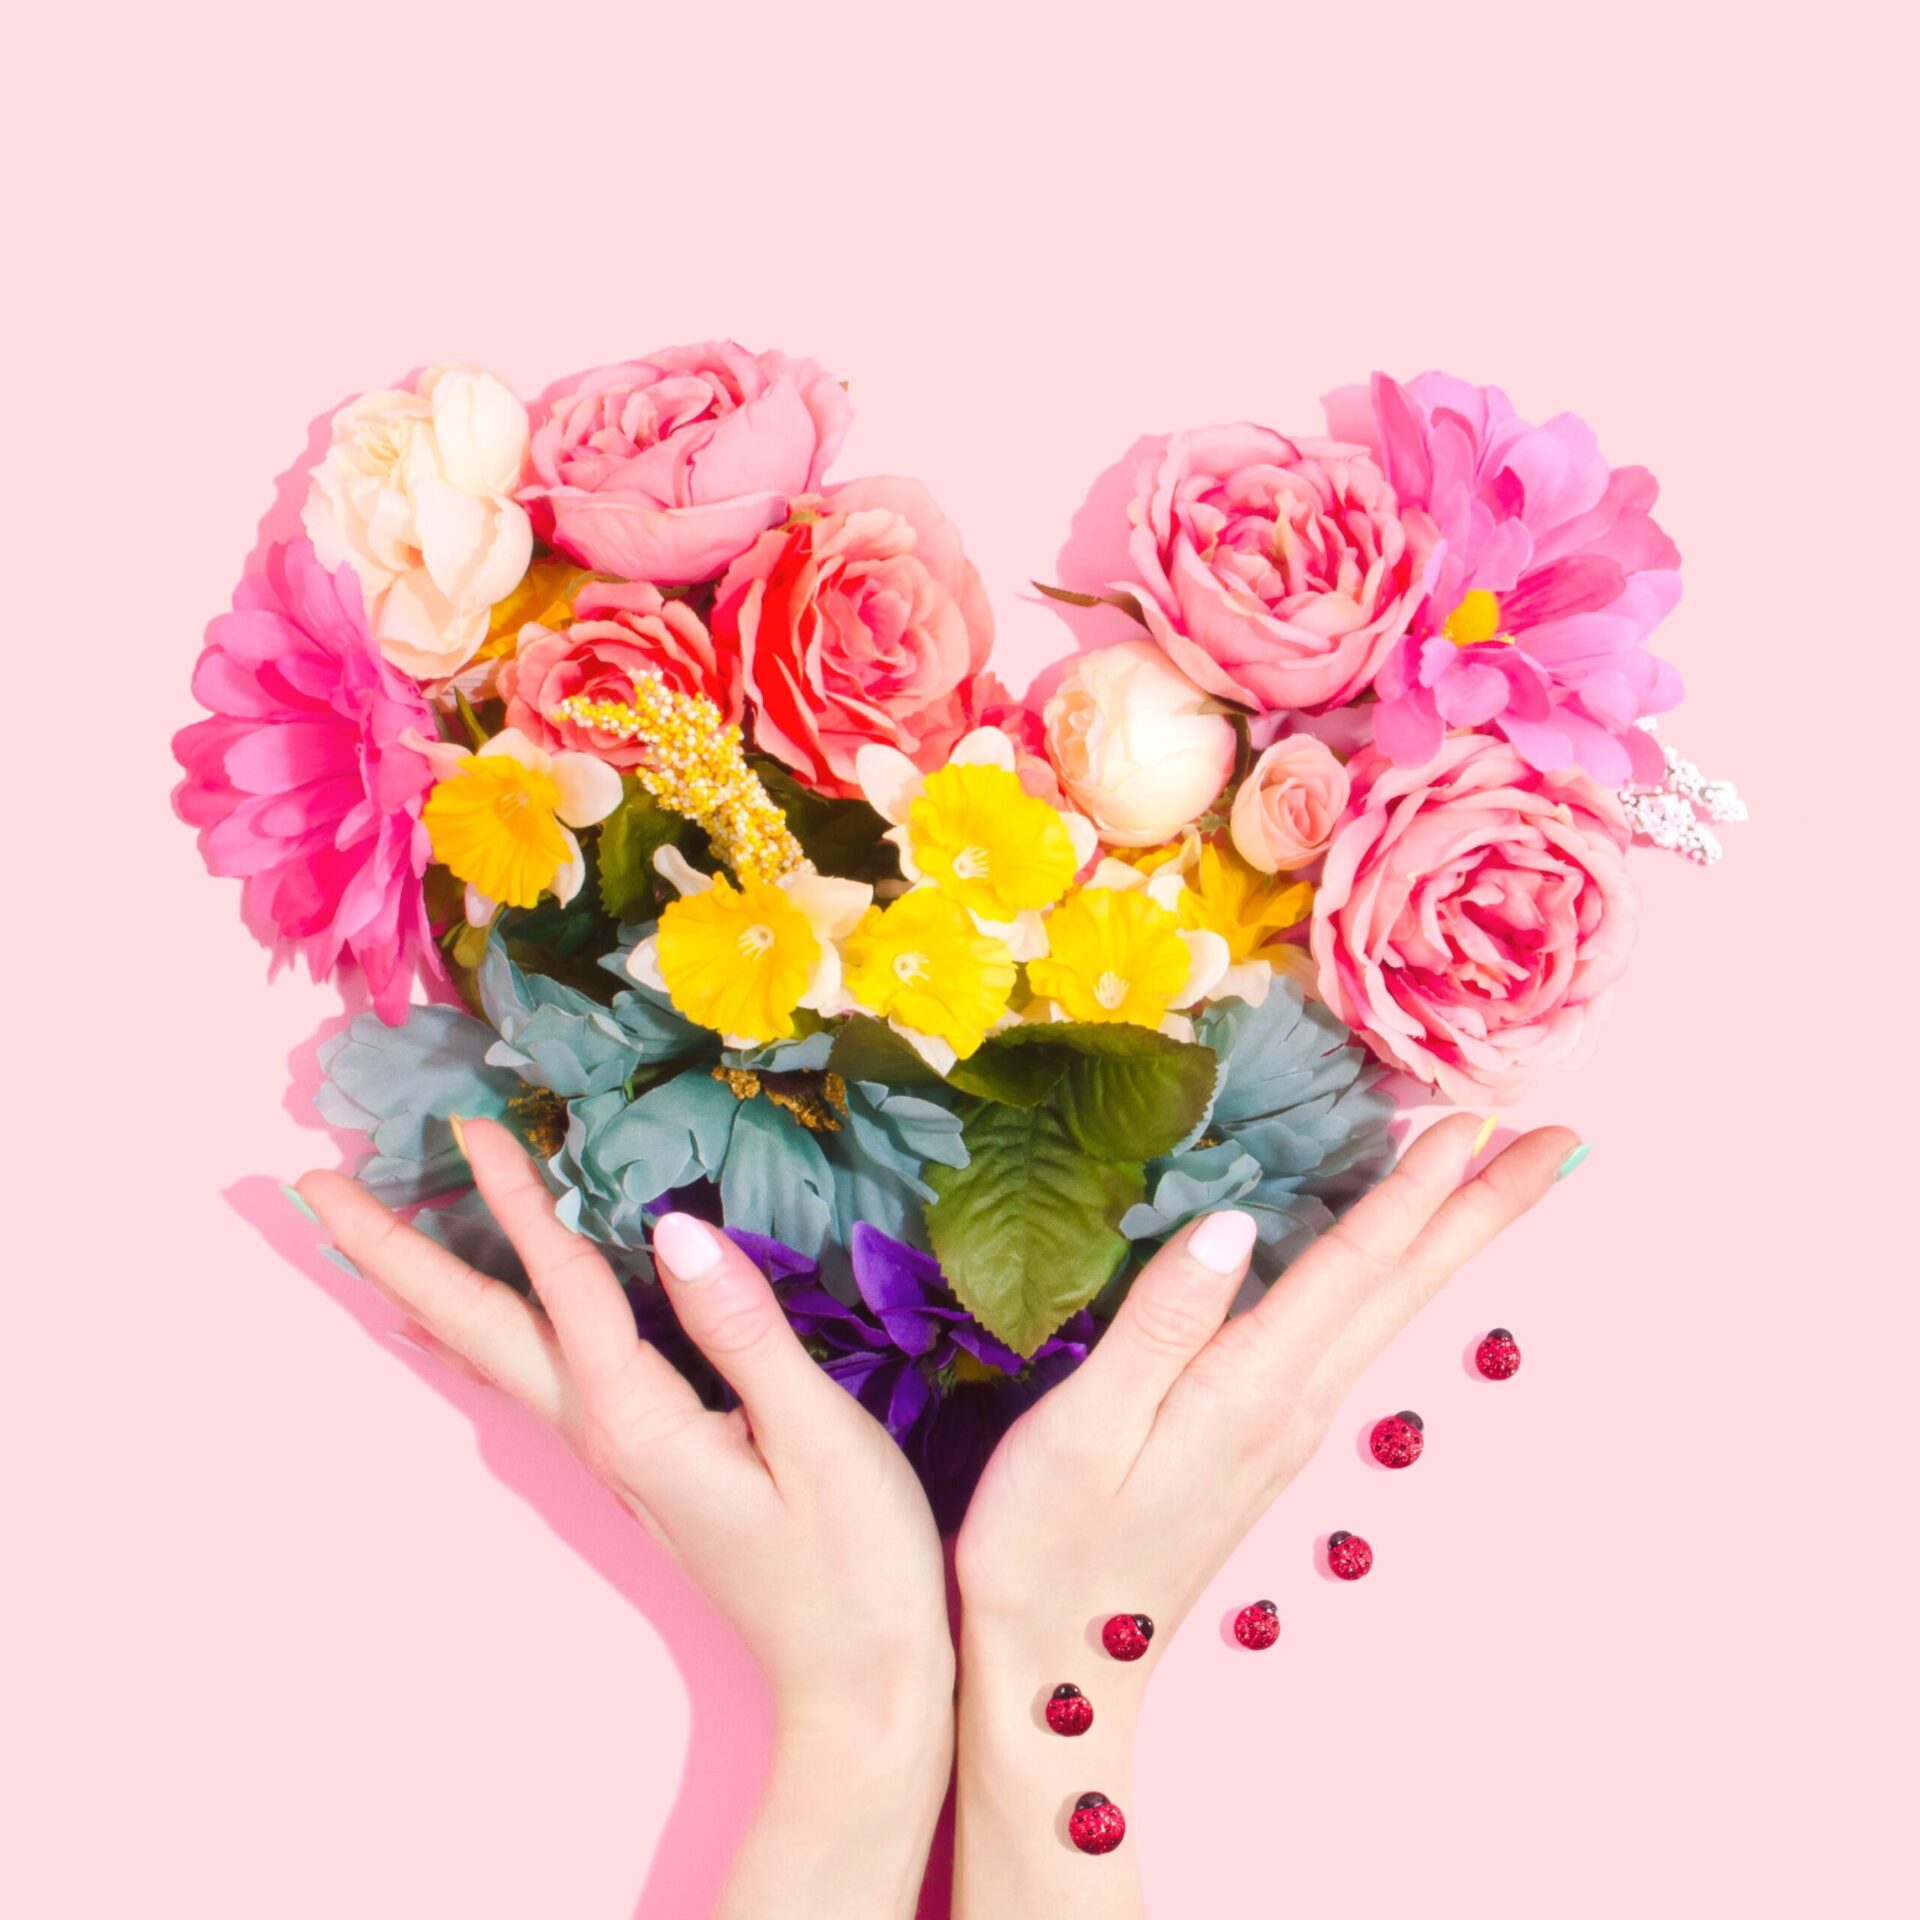 hands holding floral heart